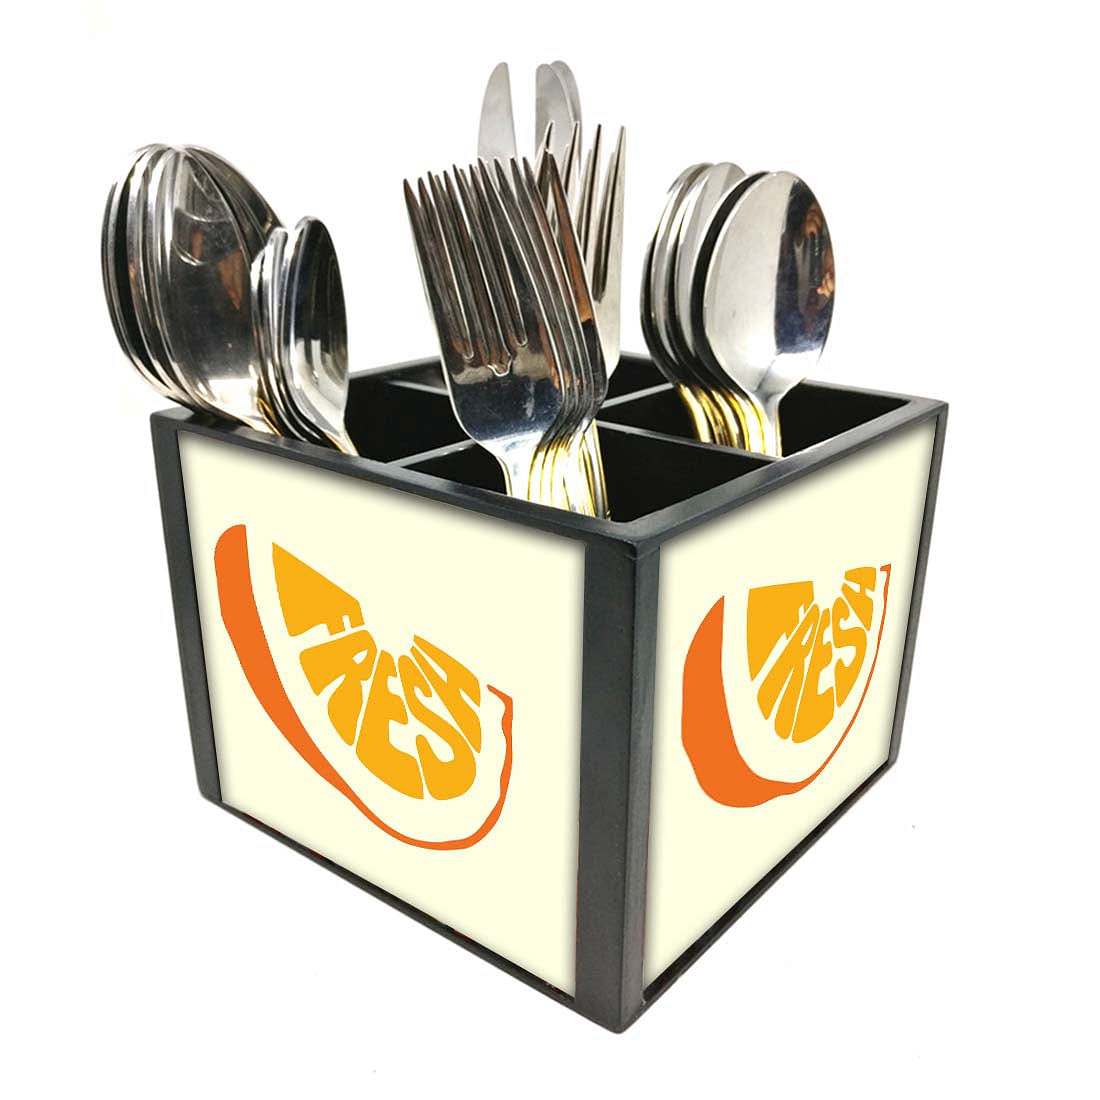 Fresh Lime Cutlery Holder Stand Silverware Caddy Organizer for Spoons, Forks & Knives-Made of Pinewood Nutcase